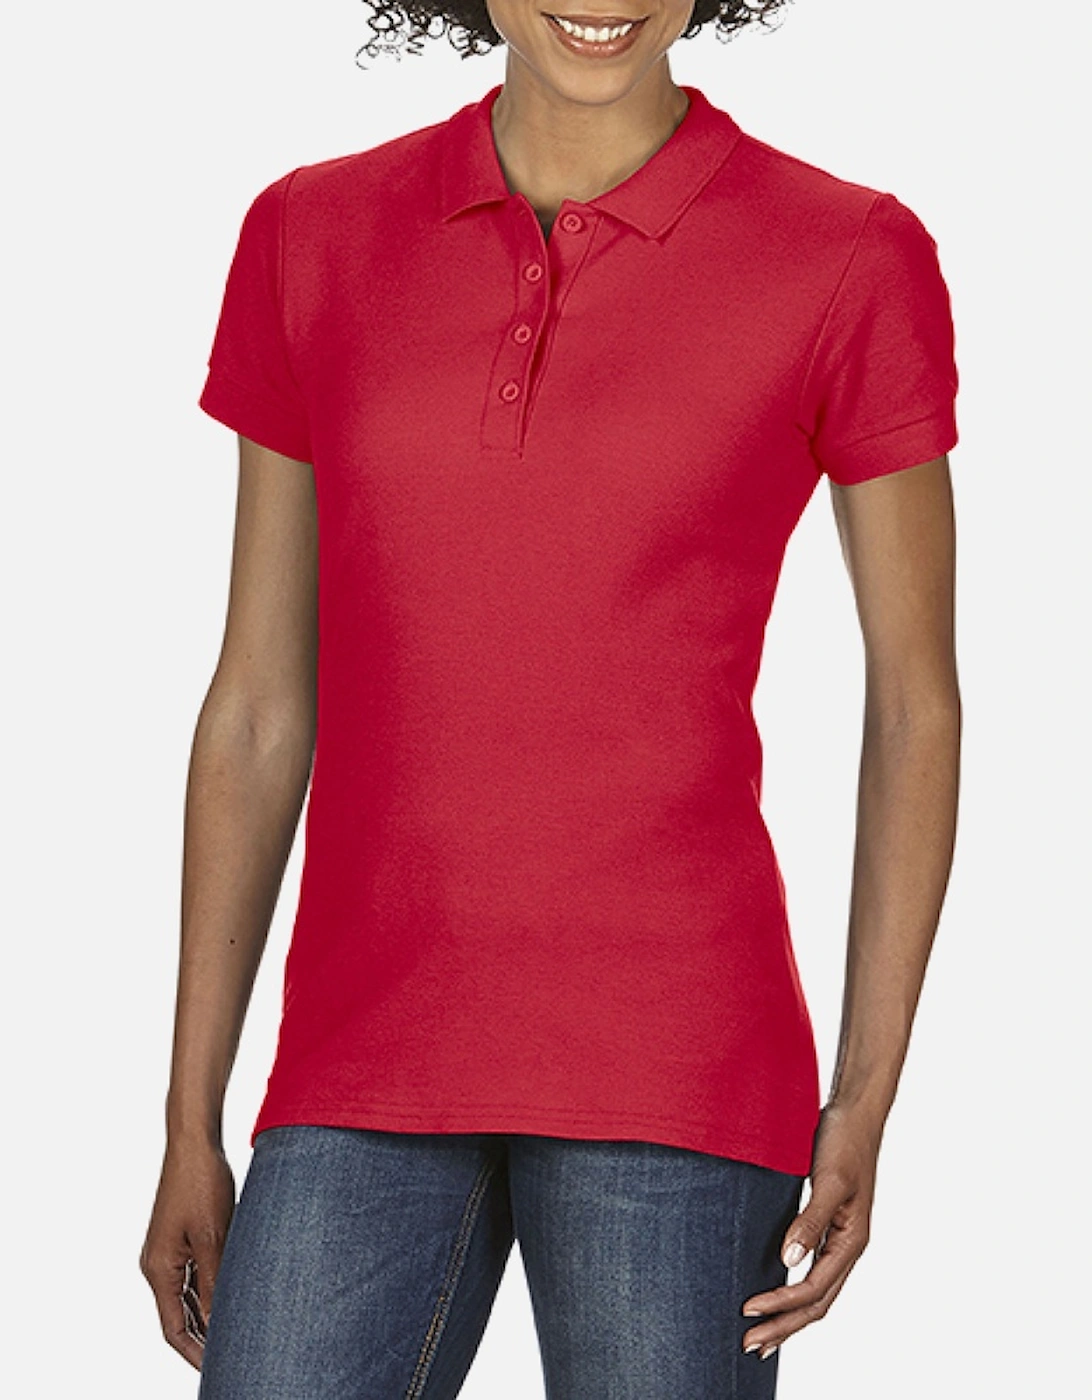 Softstyle Womens/Ladies Short Sleeve Double Pique Polo Shirt